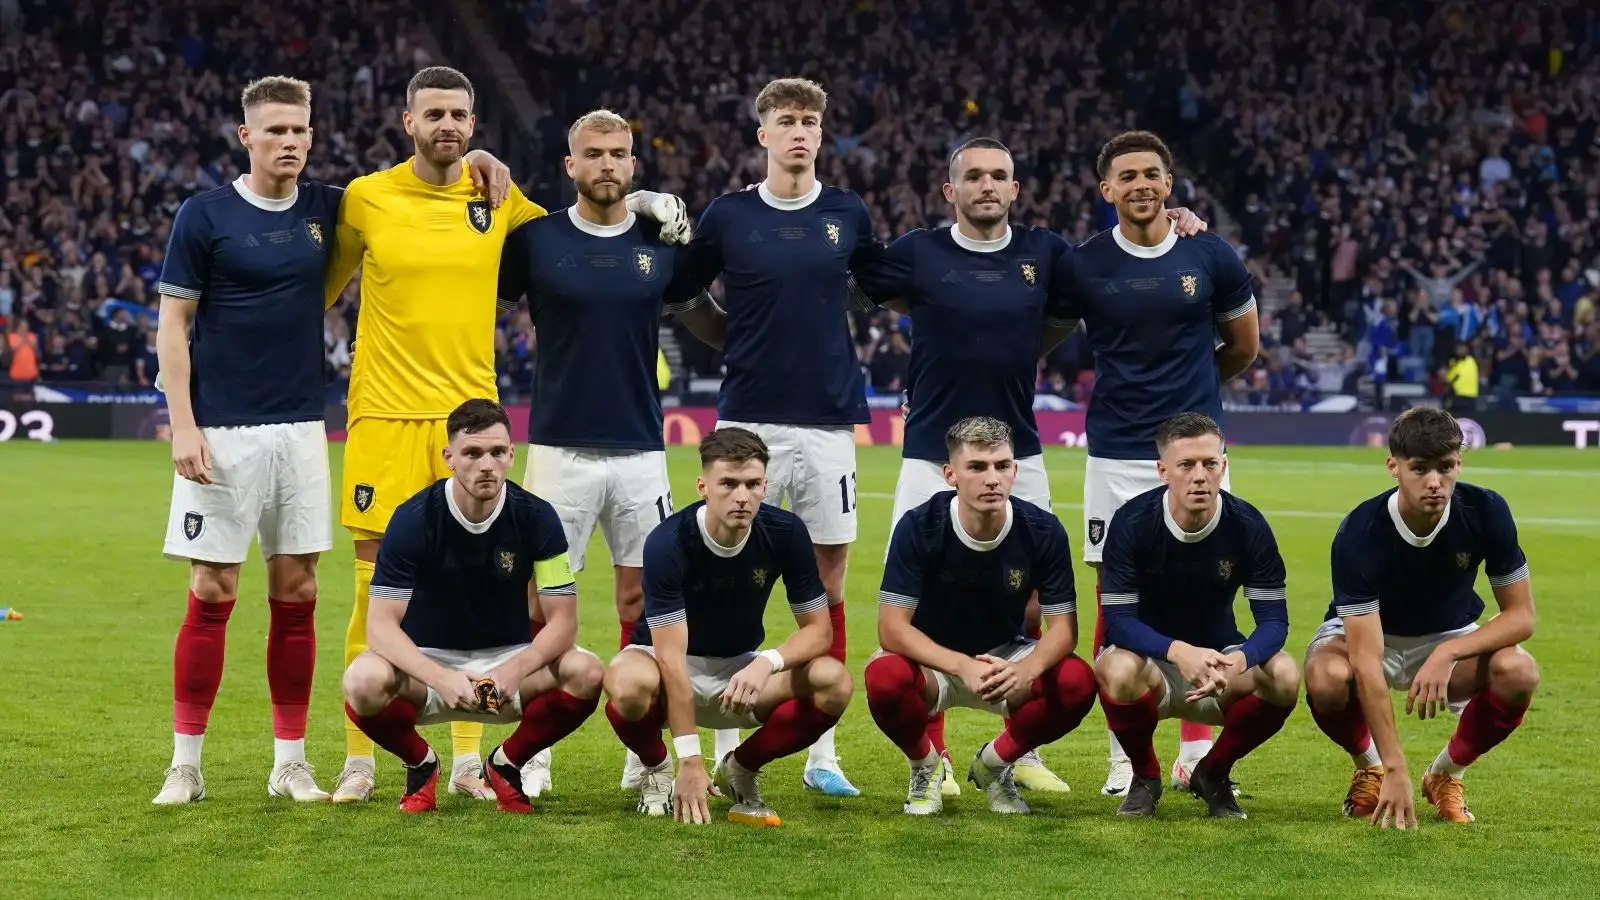 Scotland players line up before the friendly against England.